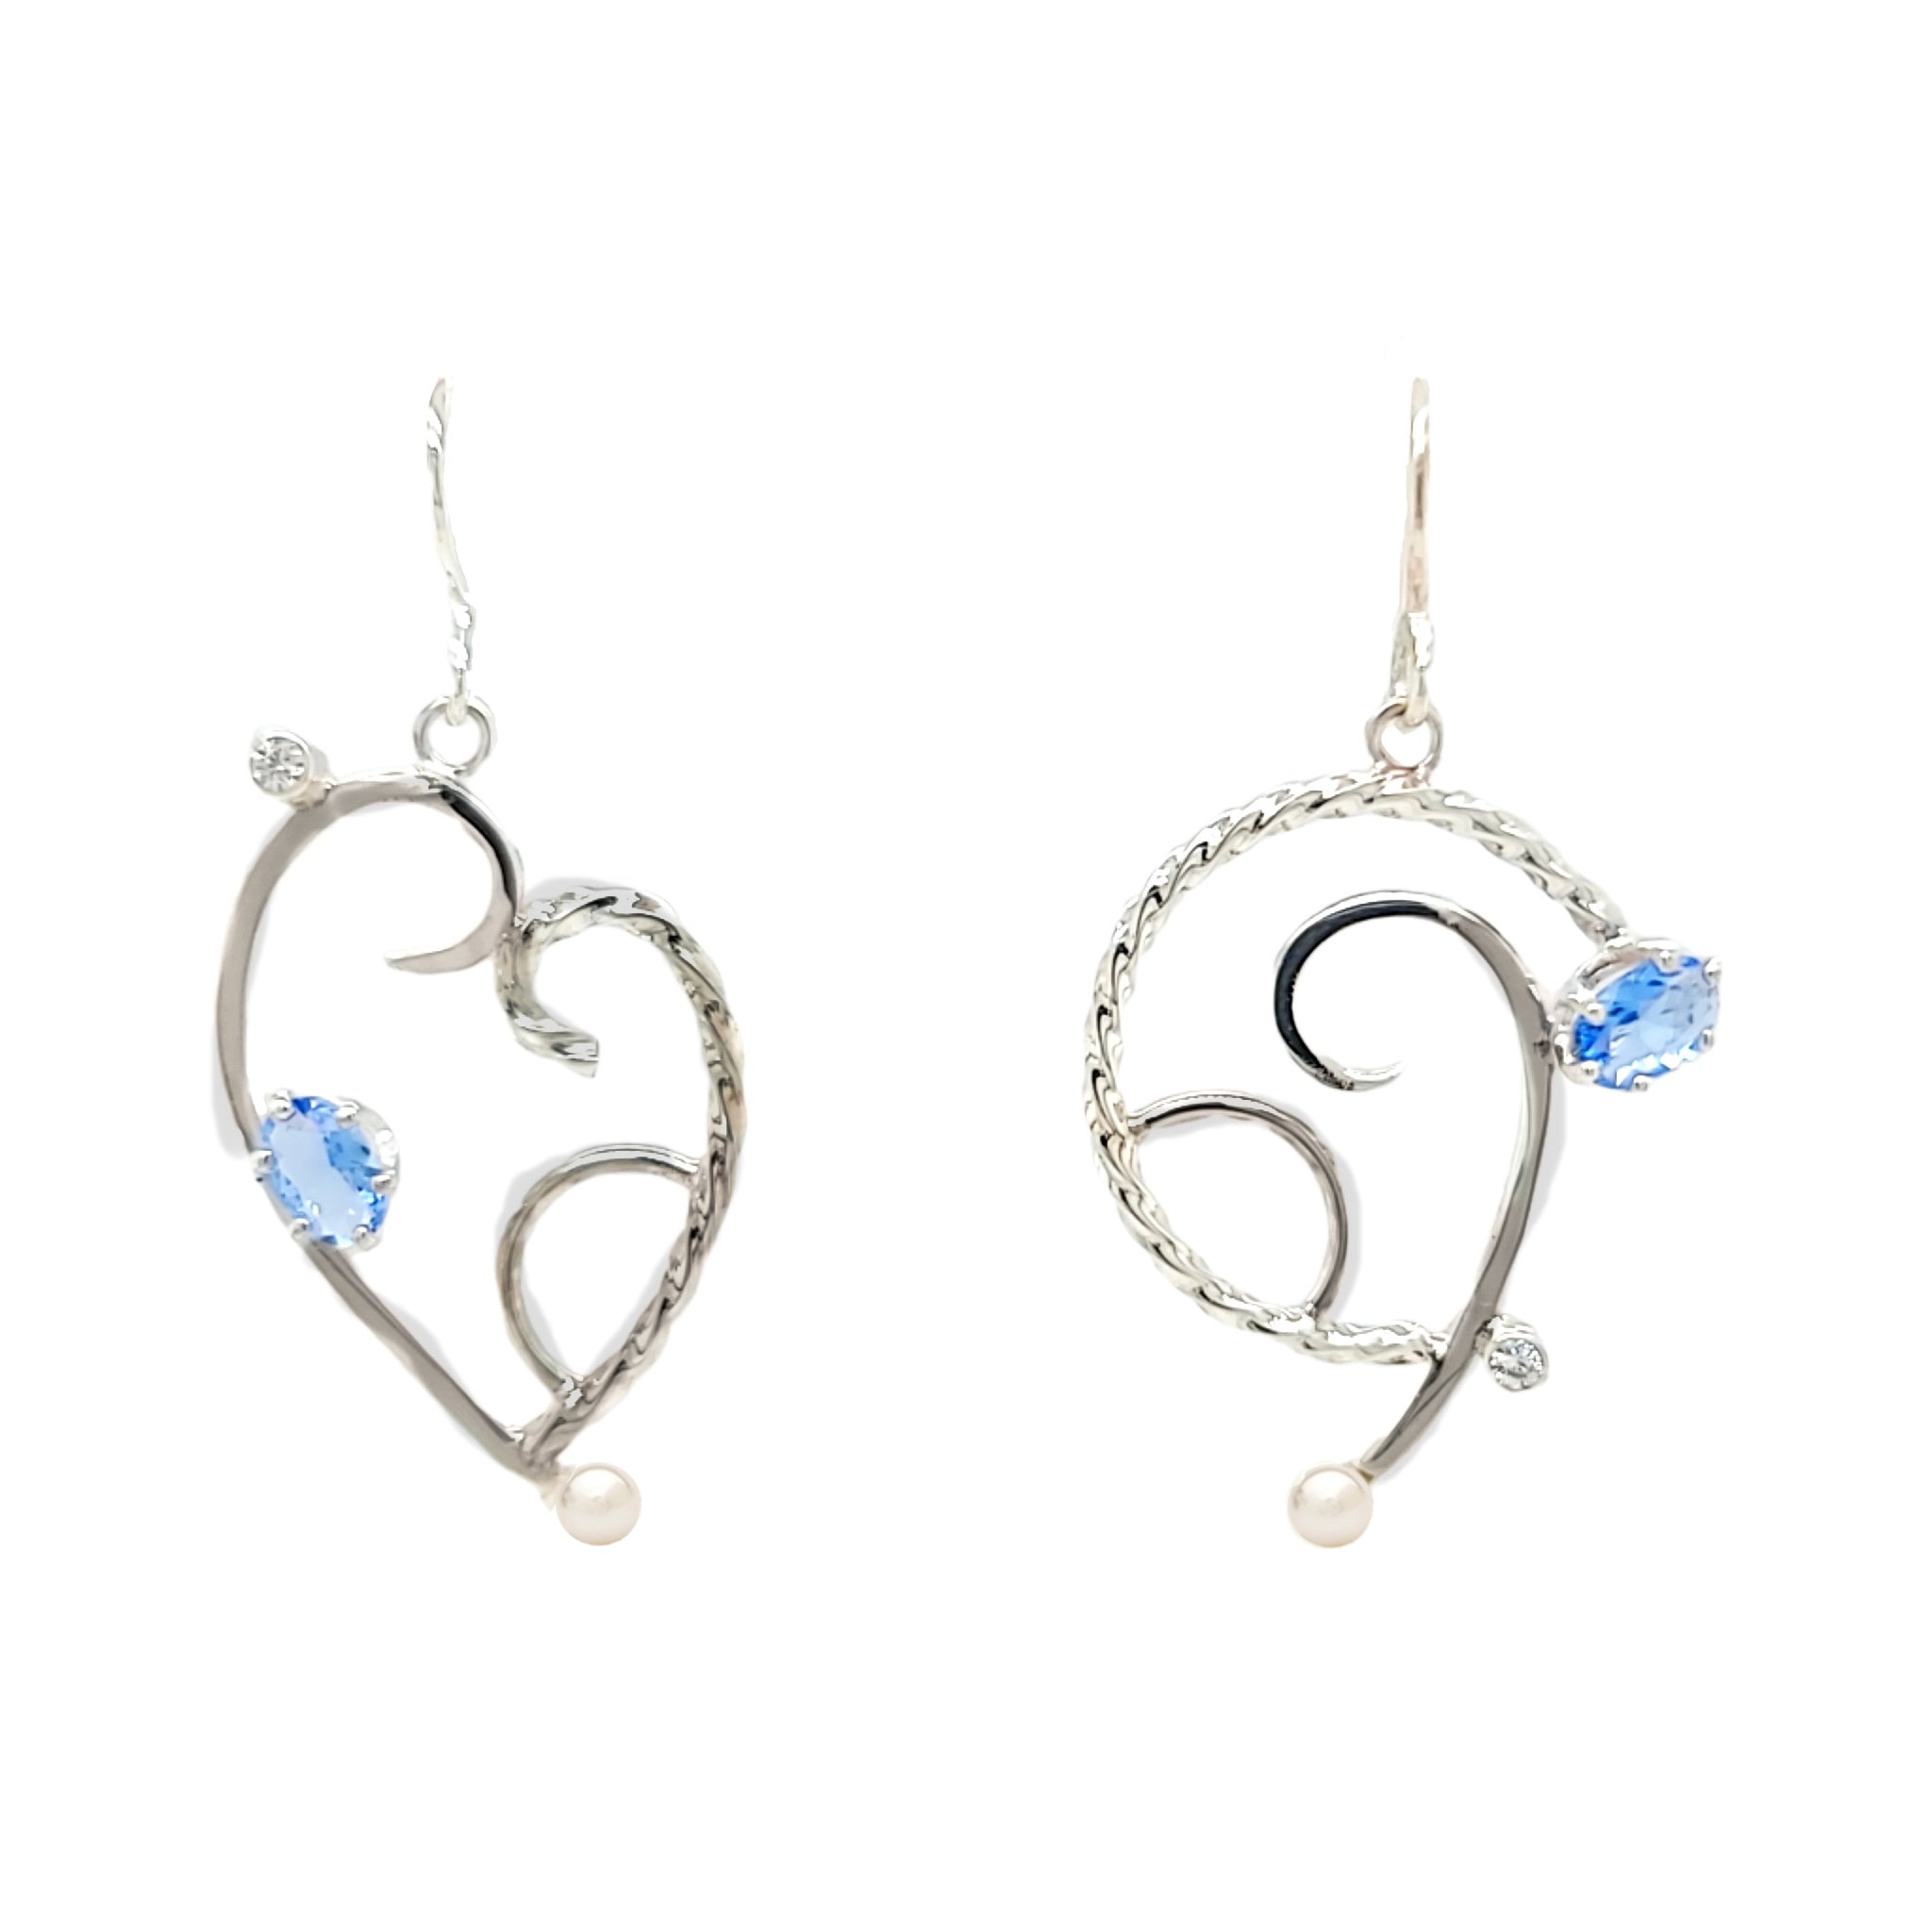 Asymmetric Sterling Silver earrings with Tanzanite Cubic Zirconia, Cubic Zirconia and Freshwater Pearls.